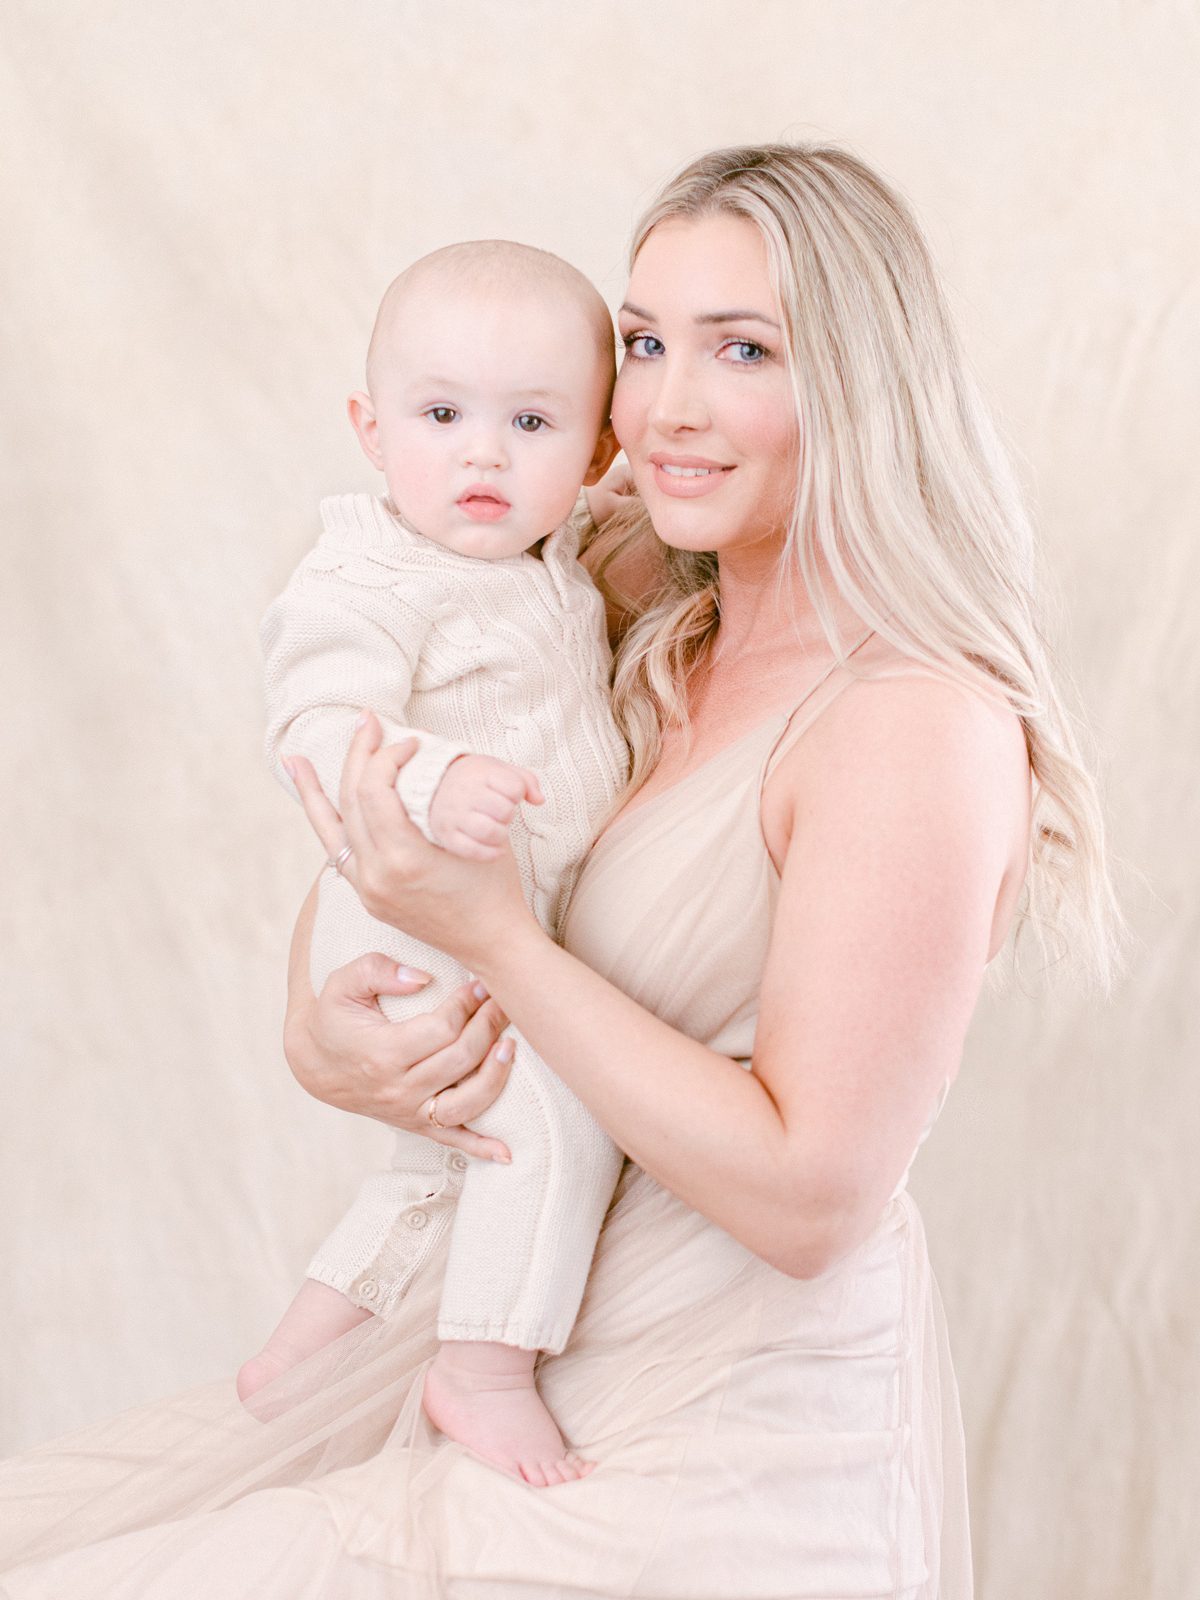 studio portrait photography of an eight month old baby boy with his mom taken in Oconee County, GA.